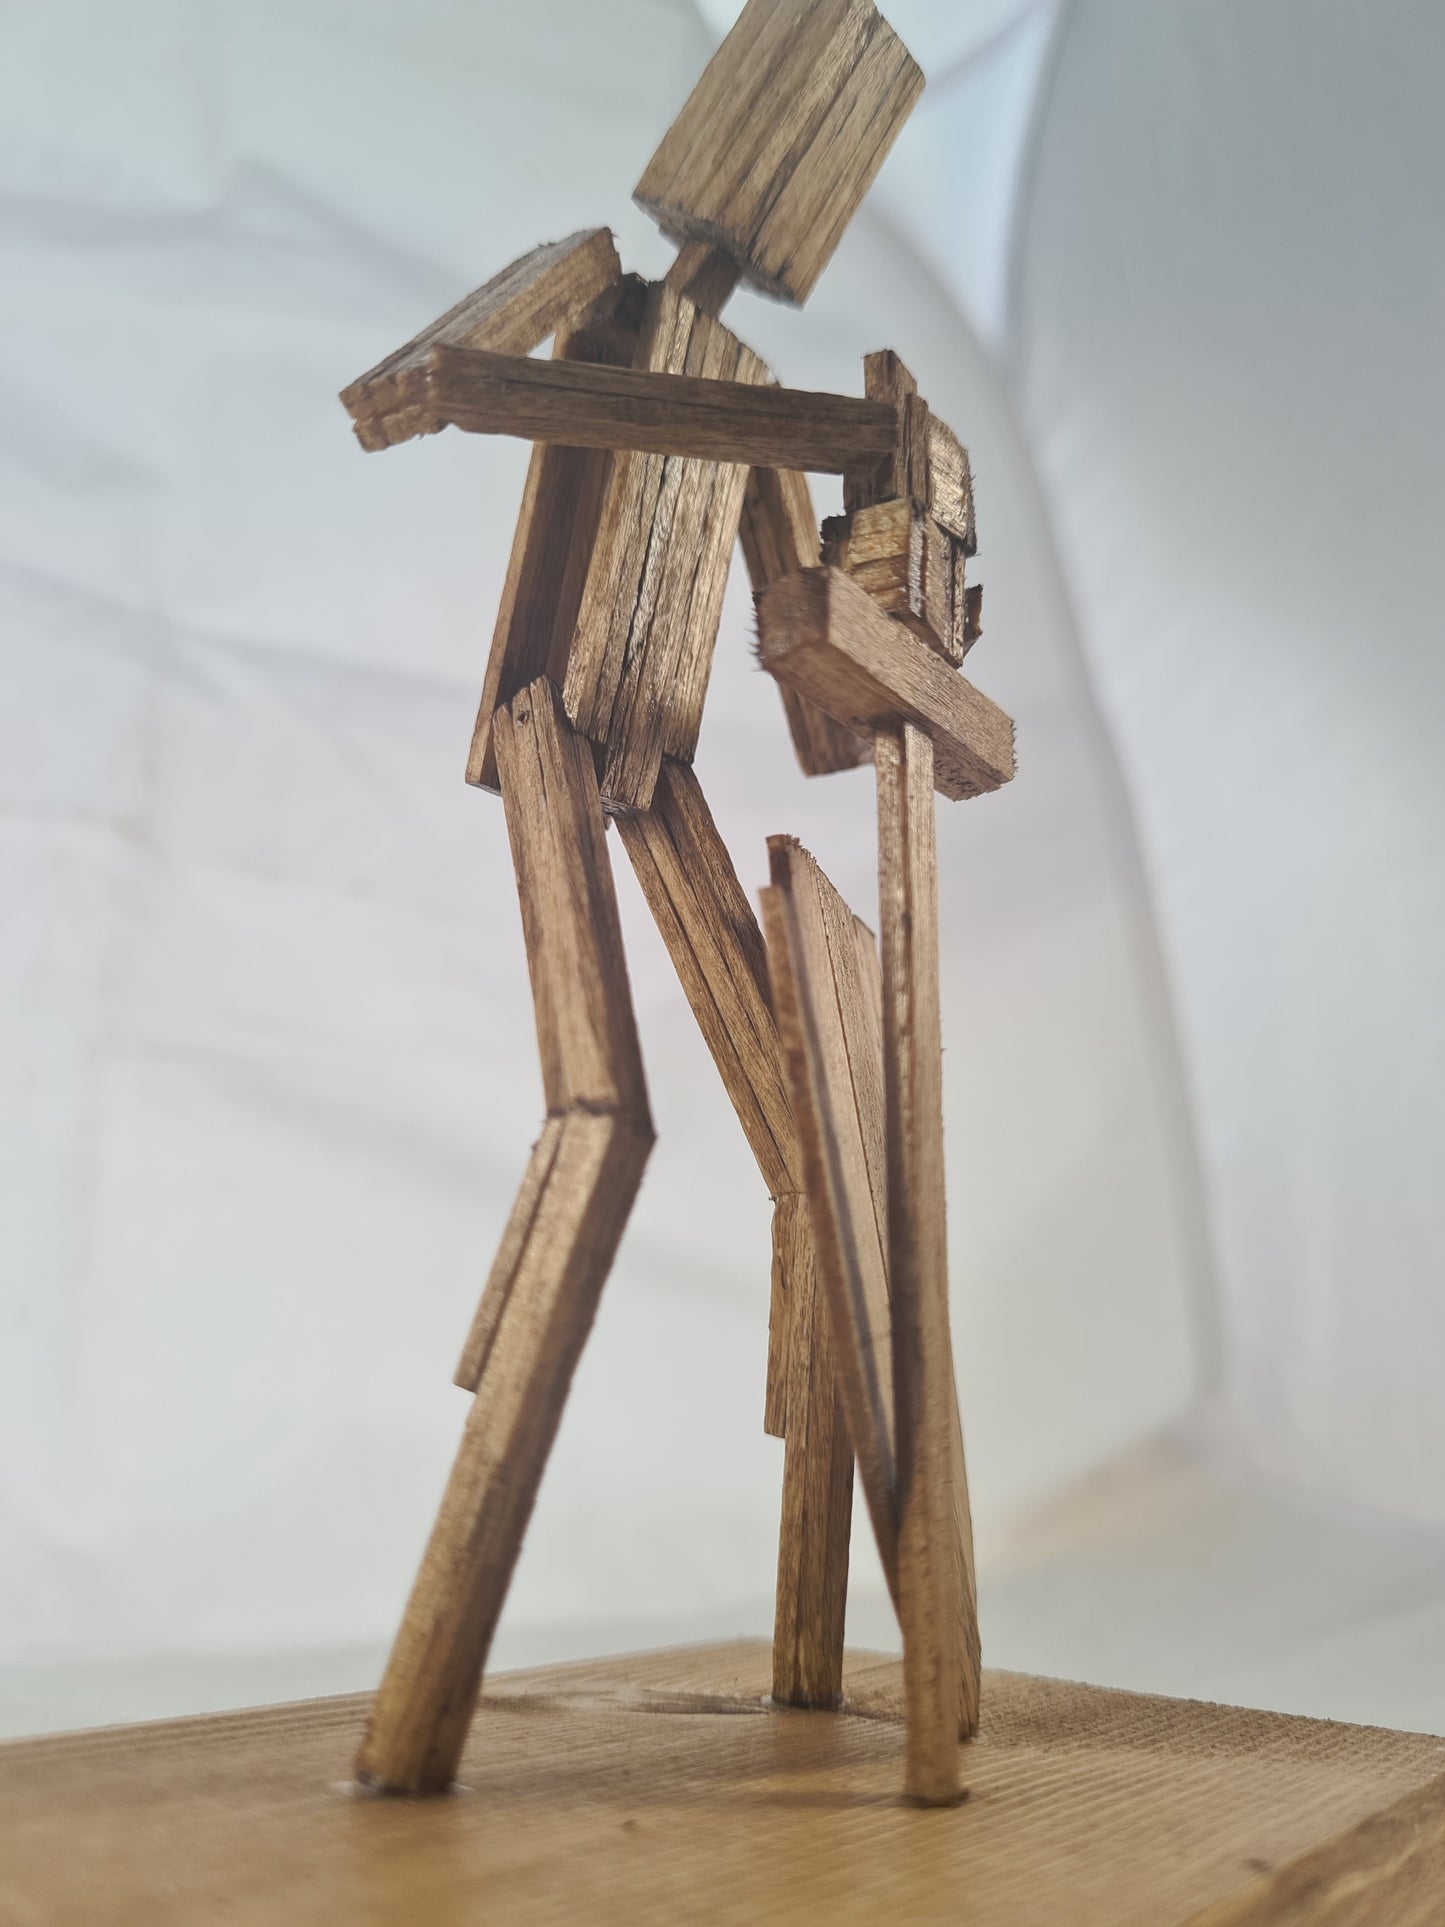 Knights Time - Handcrafted Wooden Matchstick Figures - Gifts, Ornaments and Decor By Tiggidy Designs